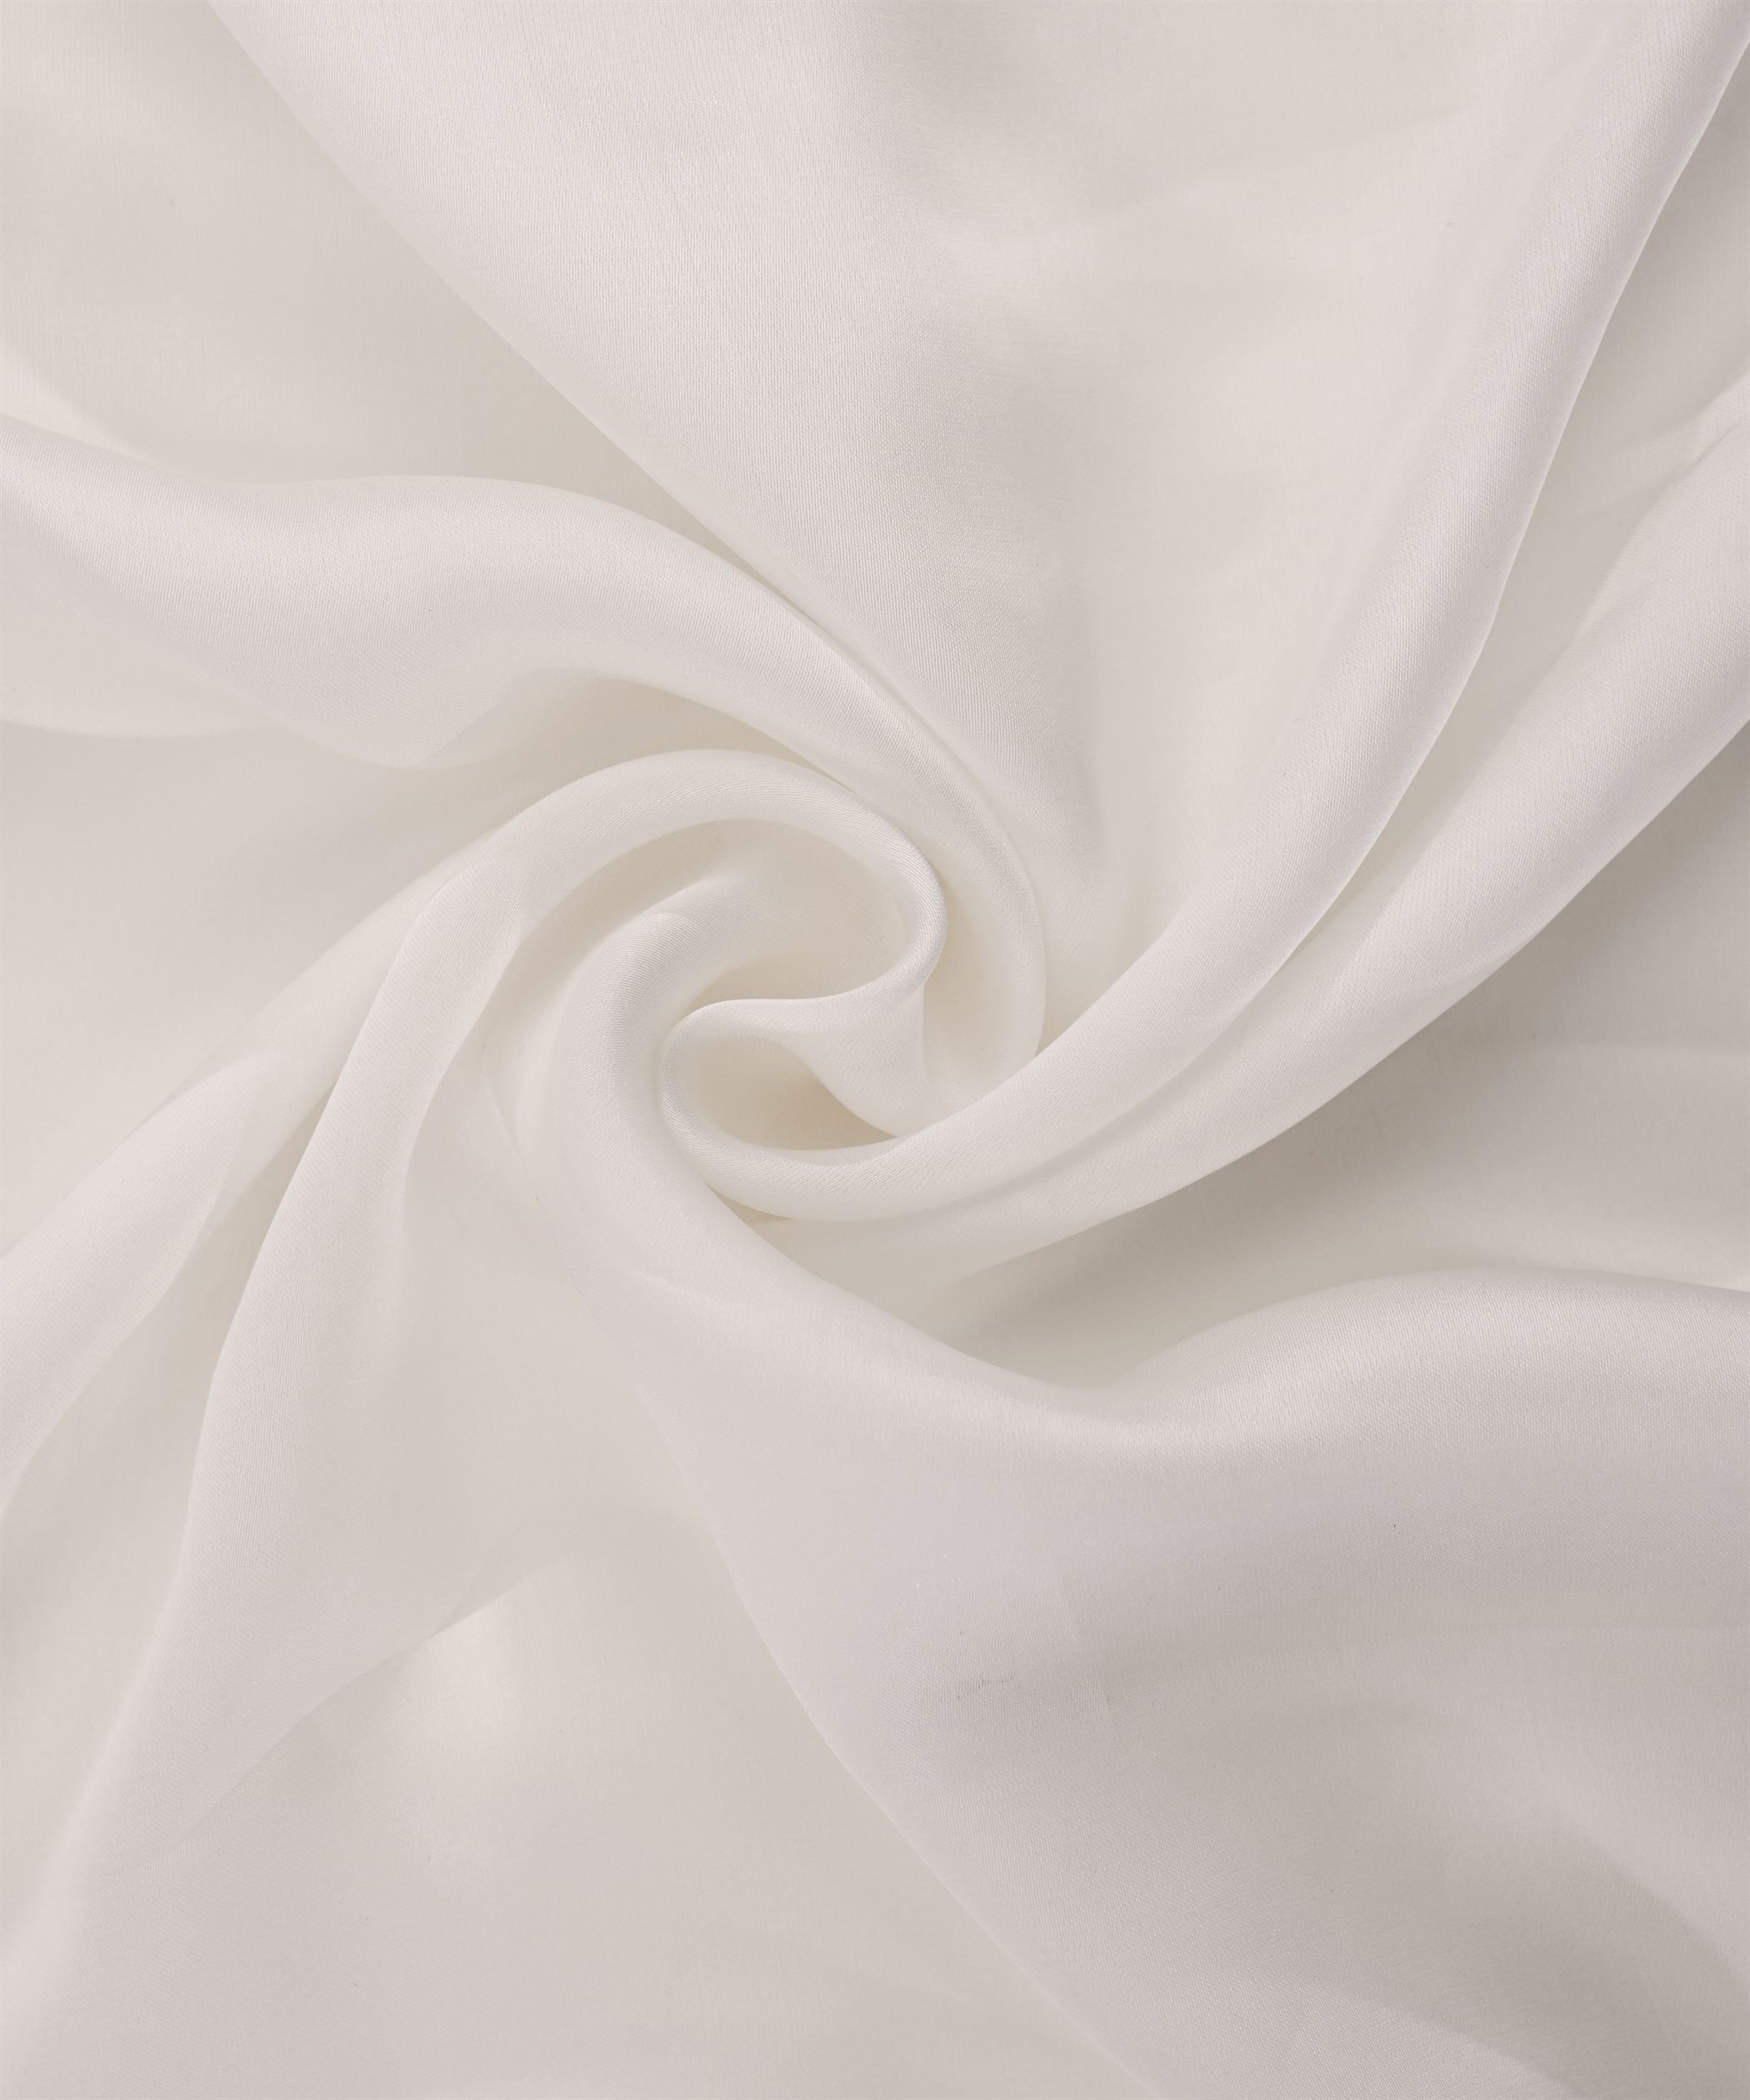 Colour Your Viscose Dyeable Organza Satin Fabric the Way You Like